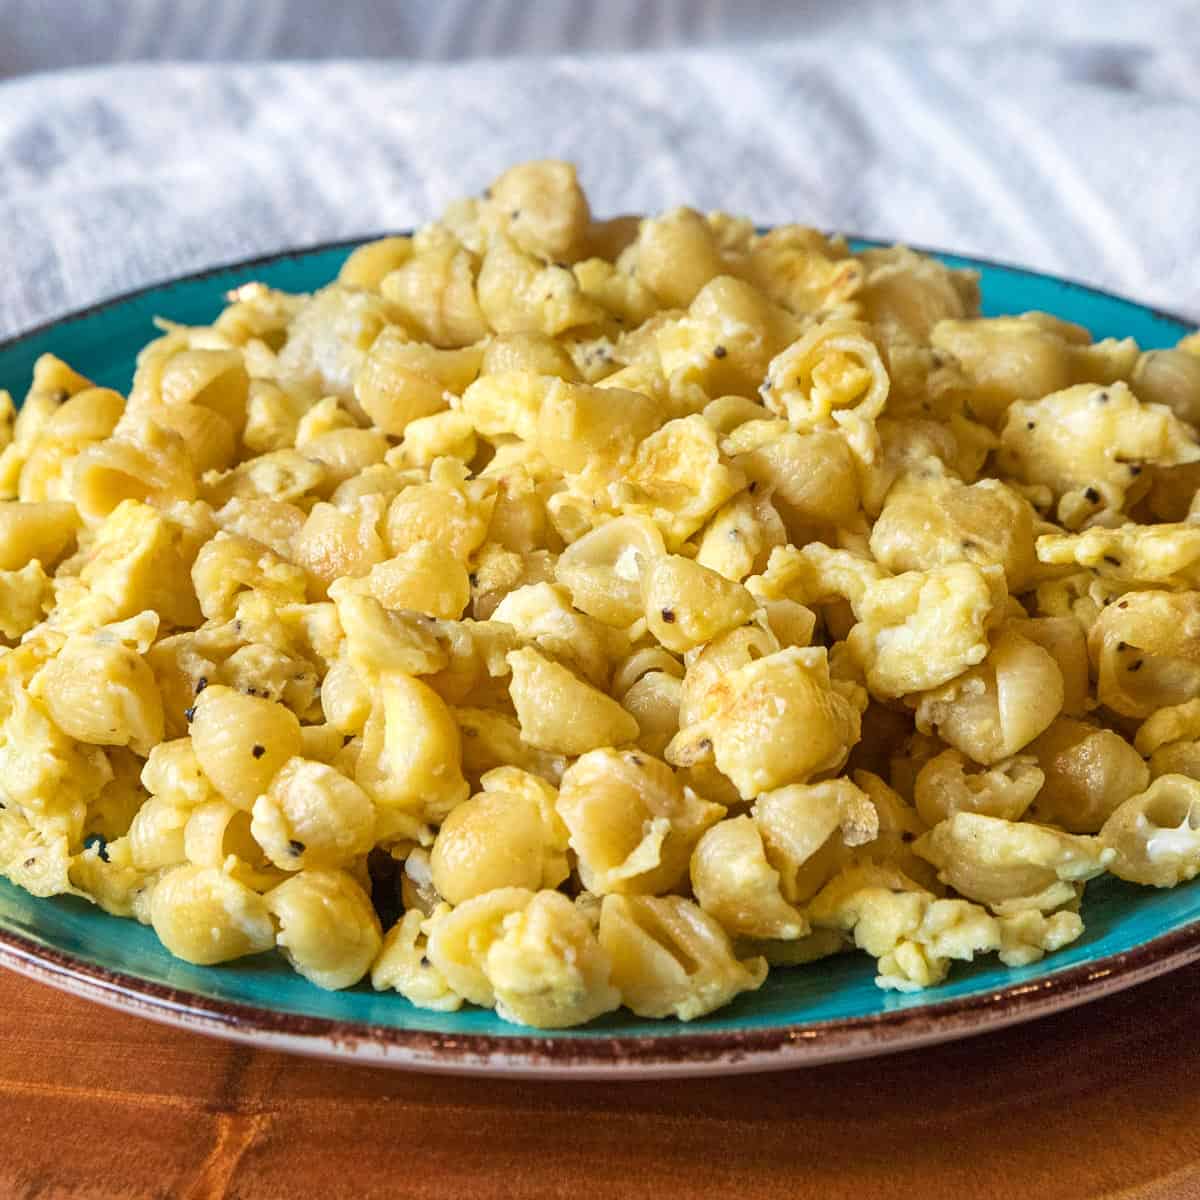 Noodles with Scrambled Eggs (Fried)